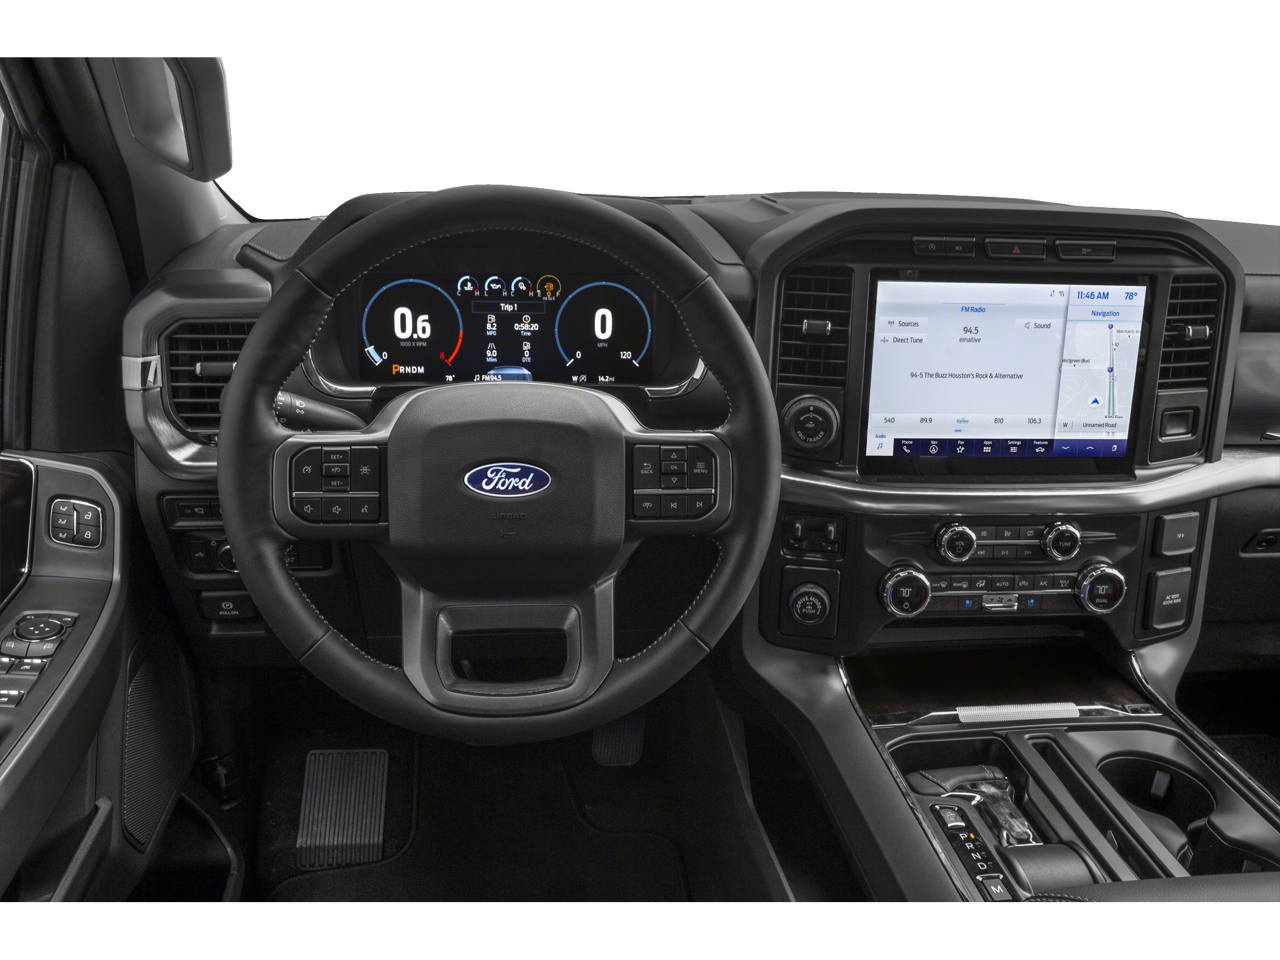 2021 Ford F-150 Lariat 5.5FT Short Bed